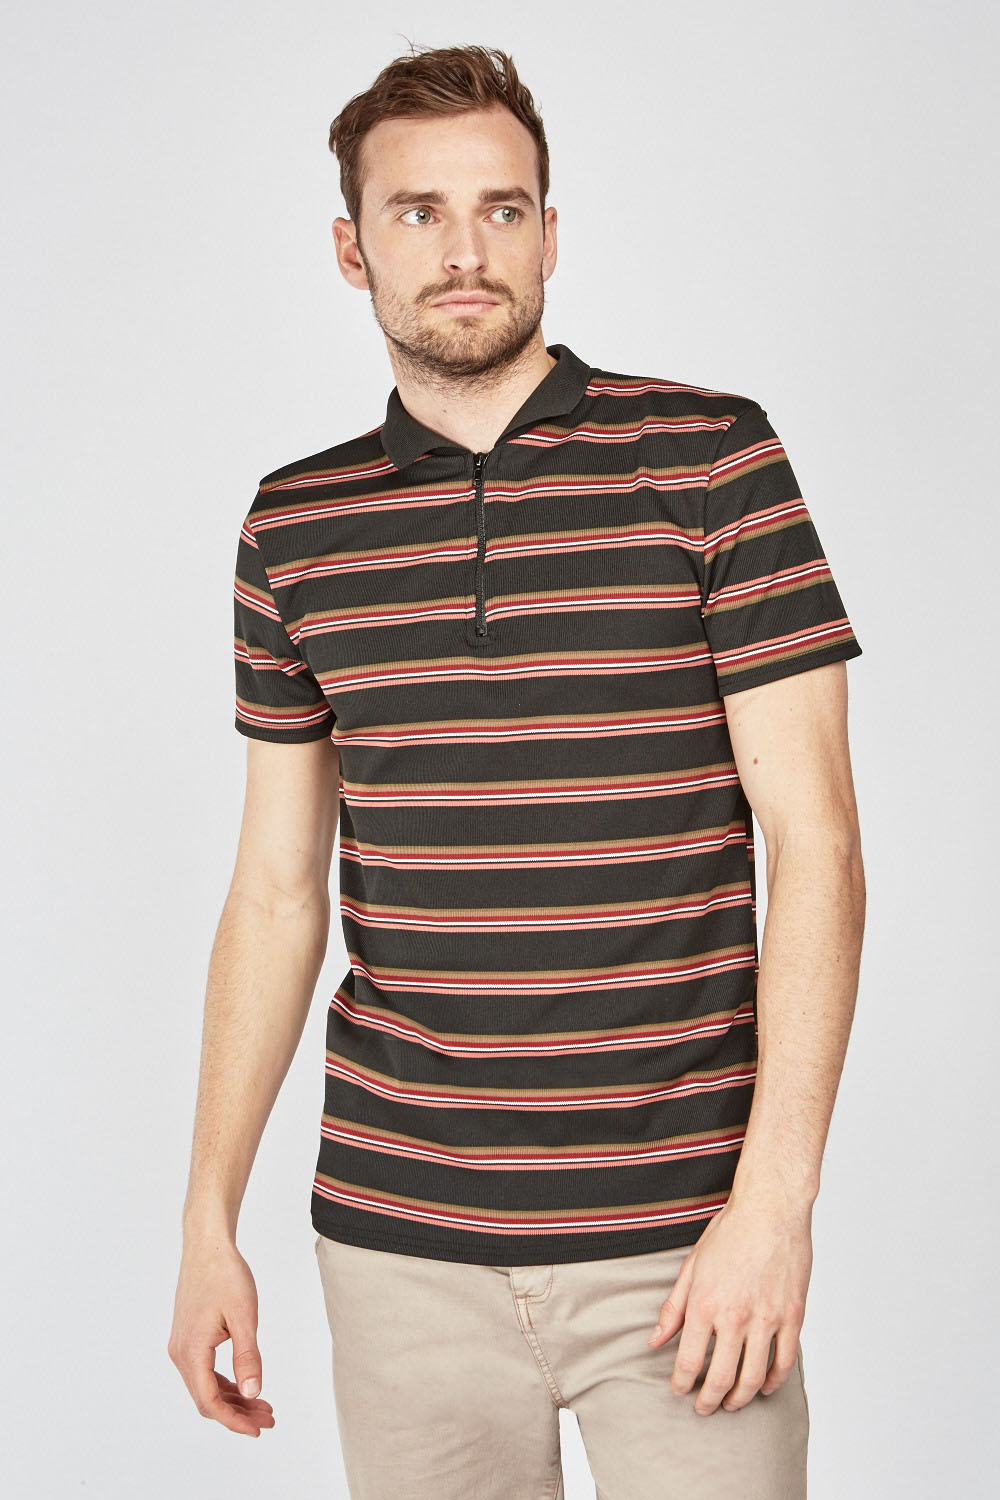 Zip Up Striped Polo Shirt - Just $7